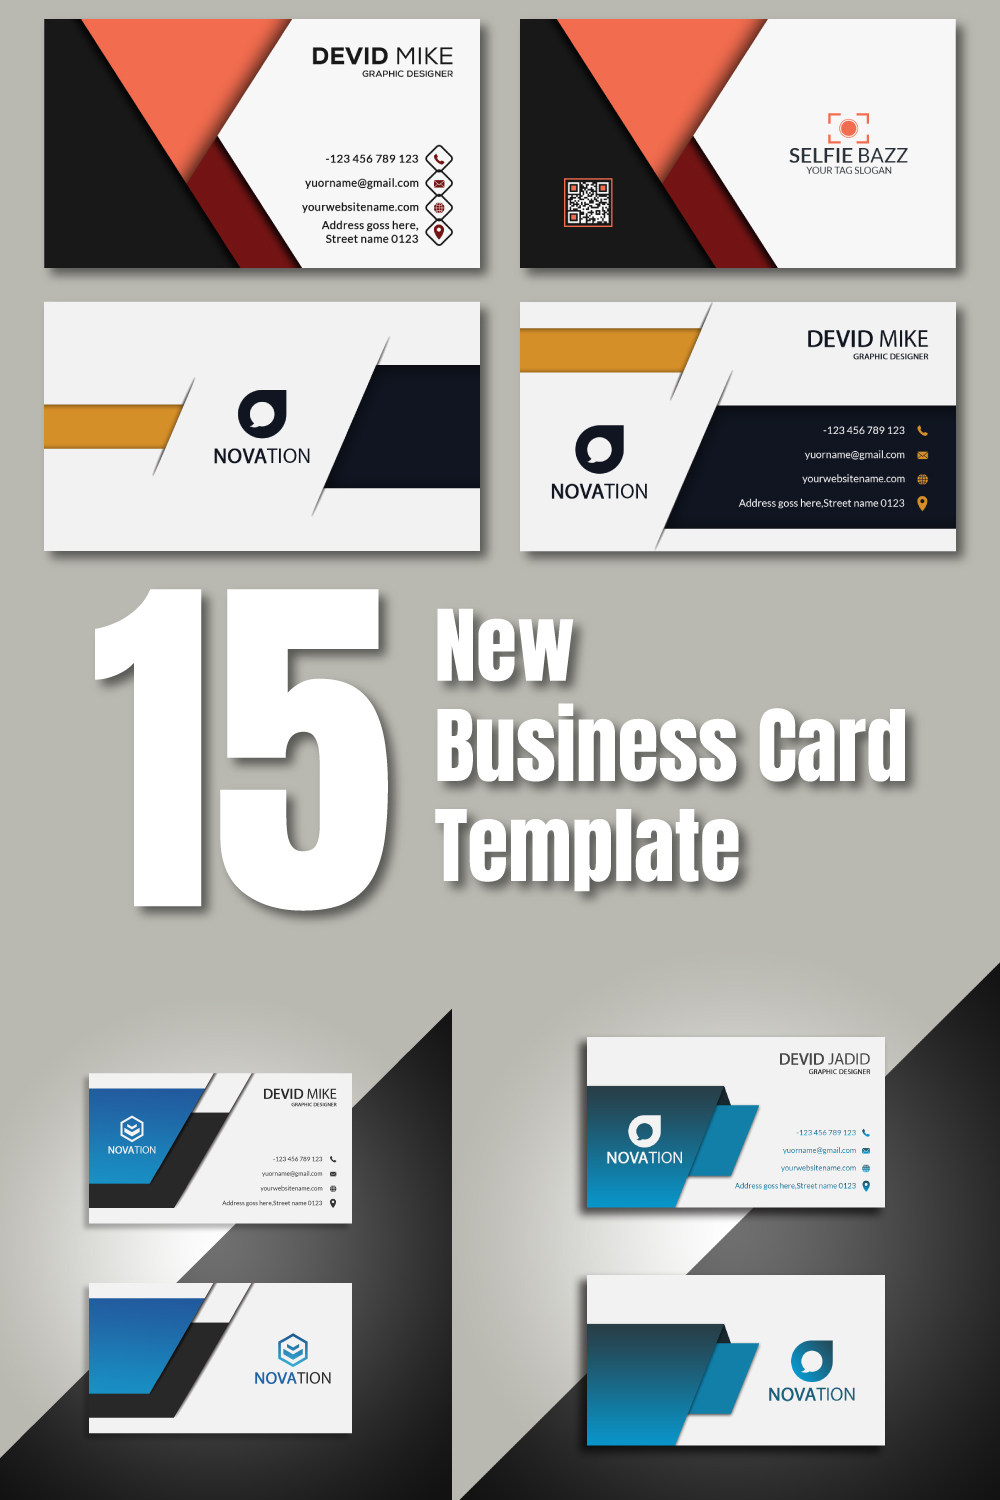 15 New Business Card Template pinterest image.